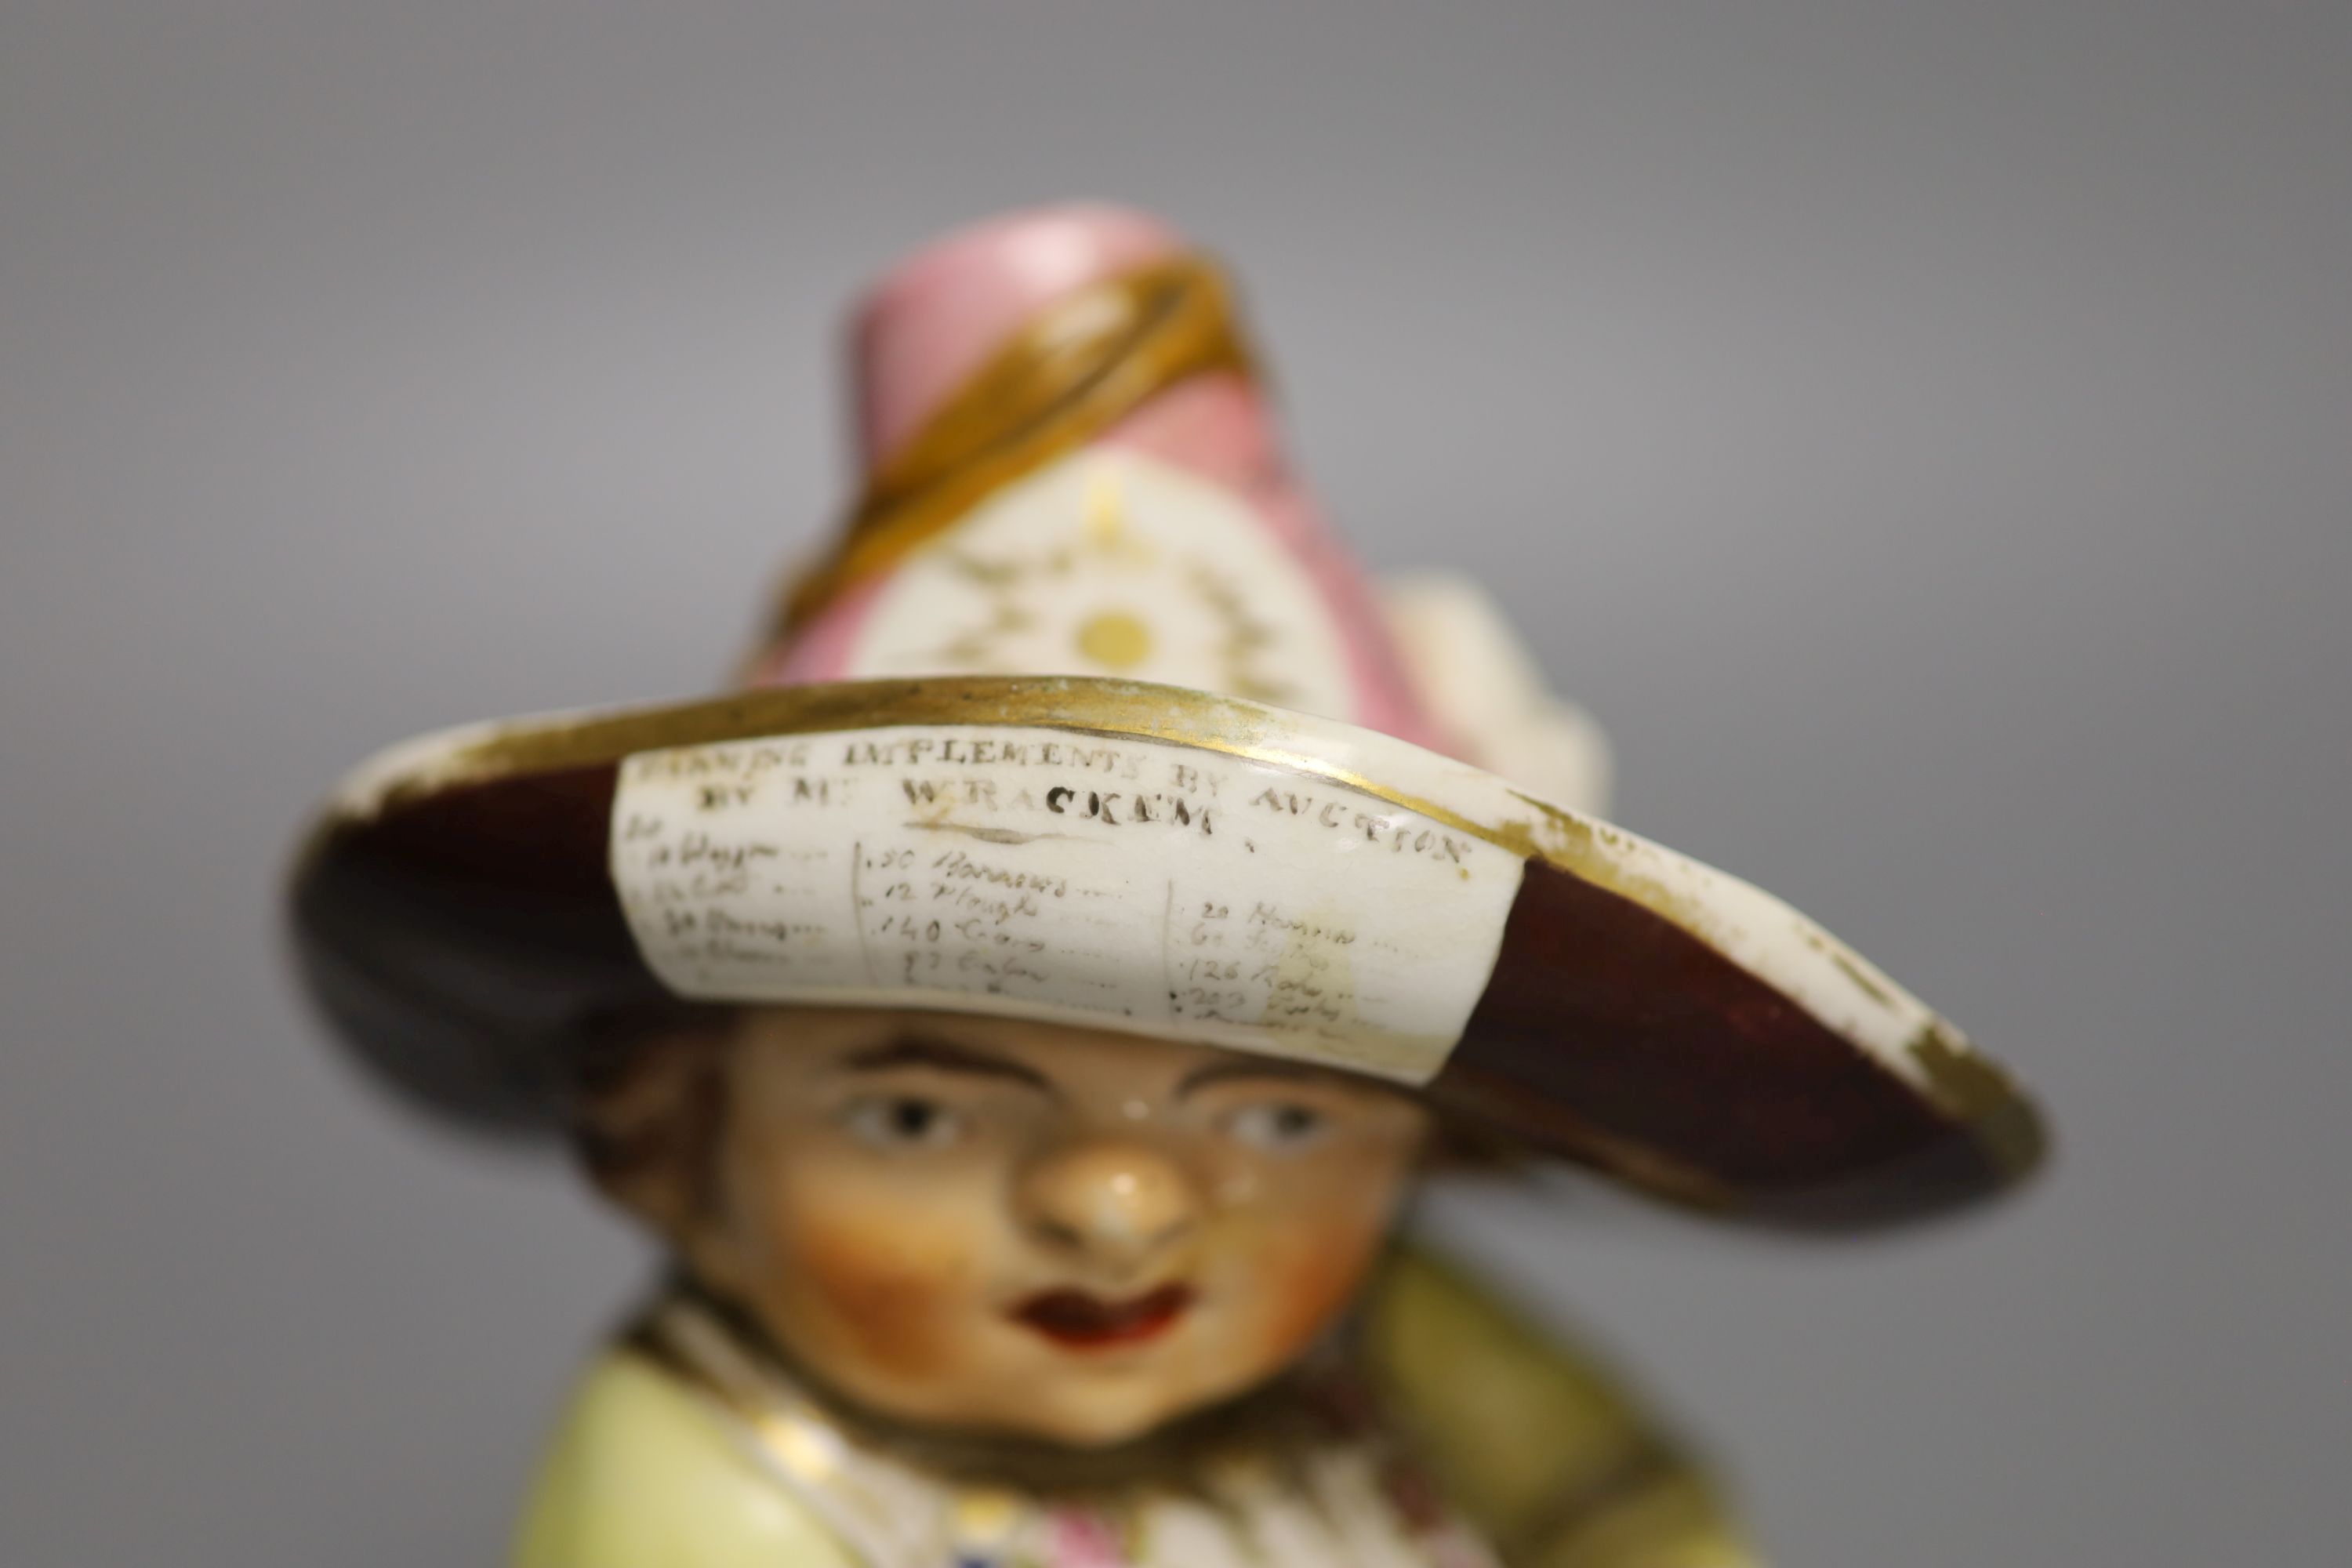 A Derby model of a Mansion Dwarf, modelled as a portly man wearing a large brimmed hat with a menu on it, c.1815 , height 18cm